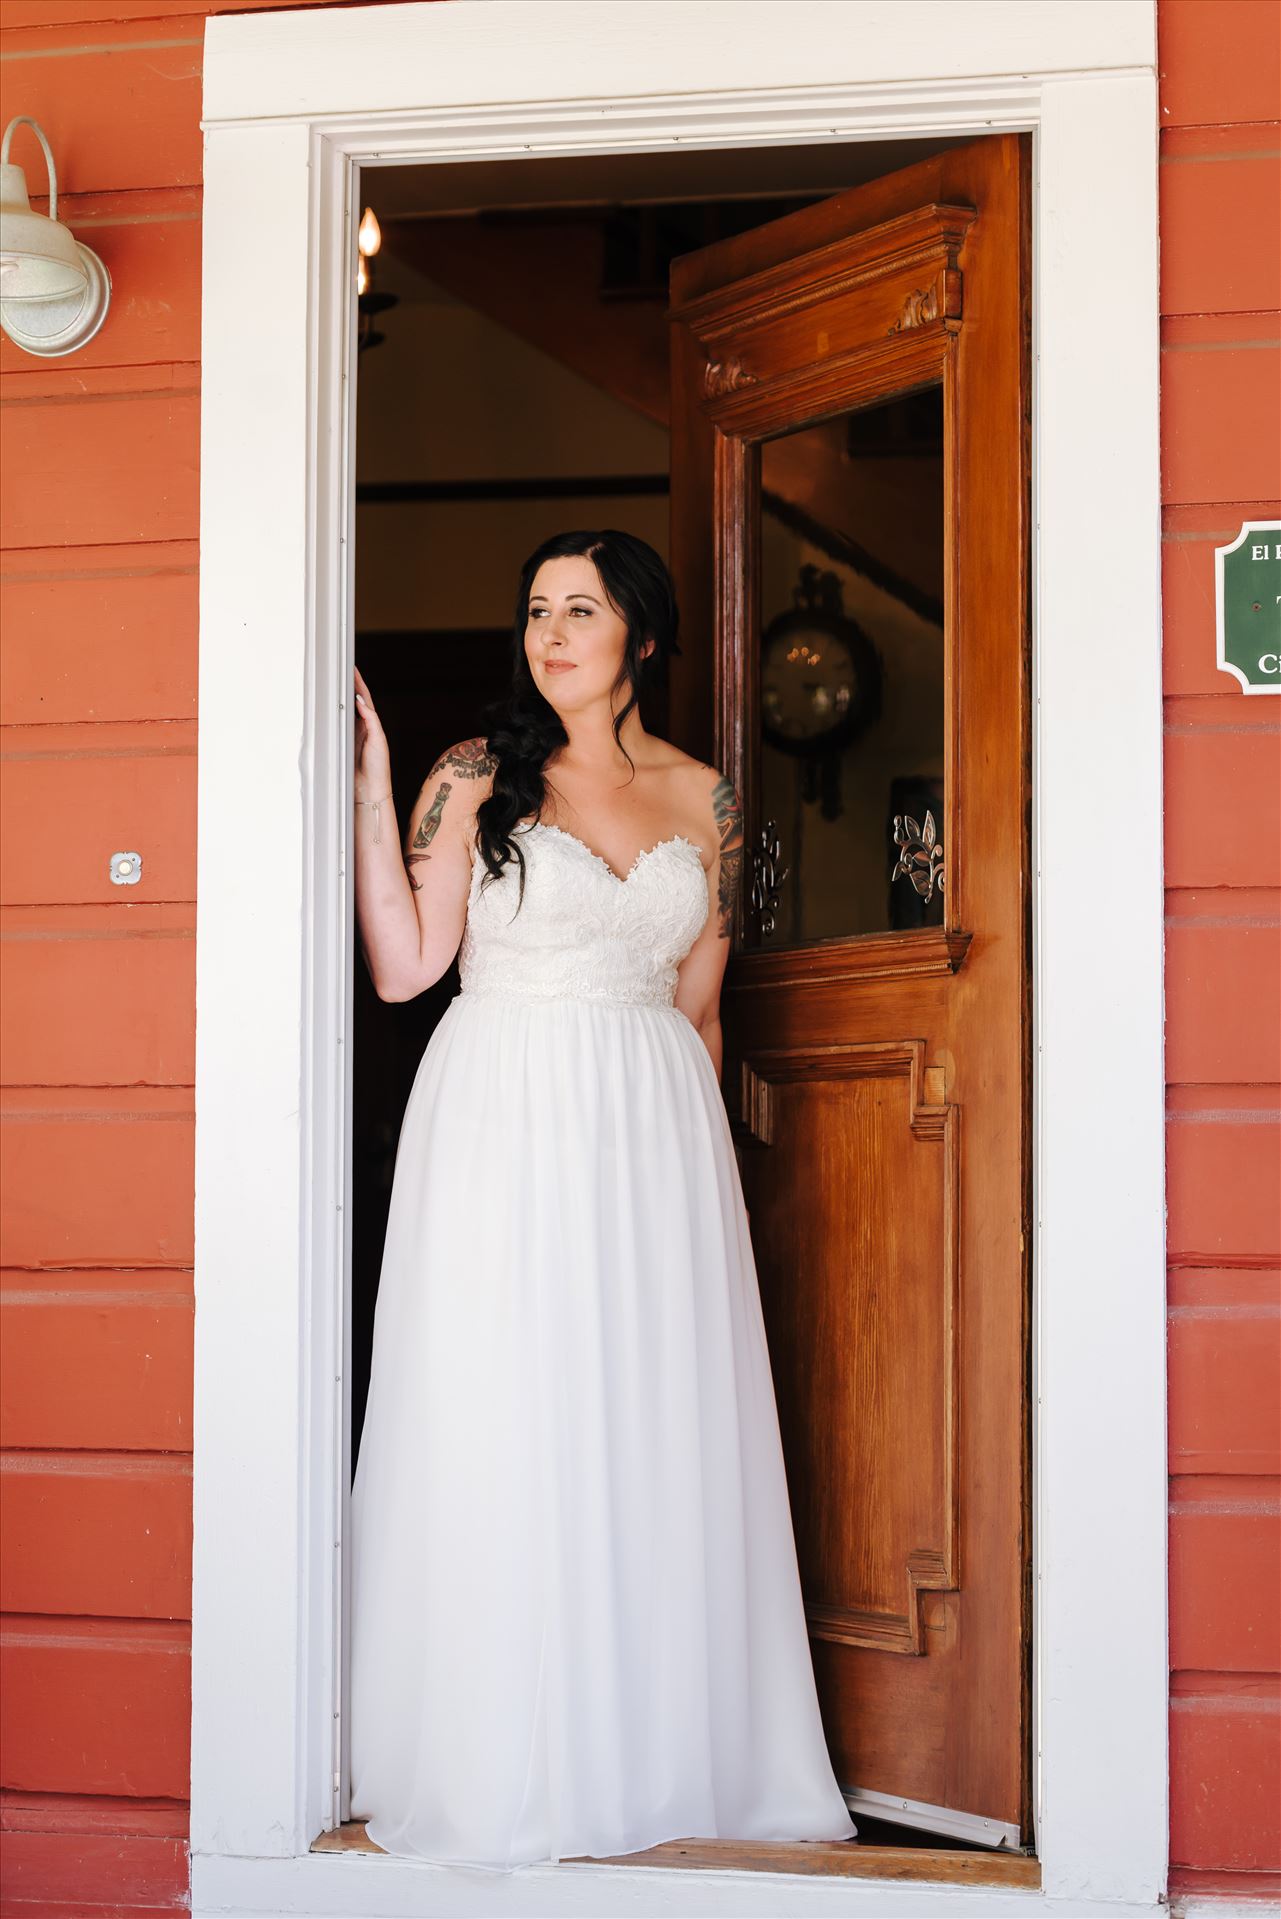 Kendra and Mitchell 027 - Emily House Bed and Breakfast Paso Robles California Wedding Photography by Mirrors Edge Photography.  Bride in the doorway by Sarah Williams